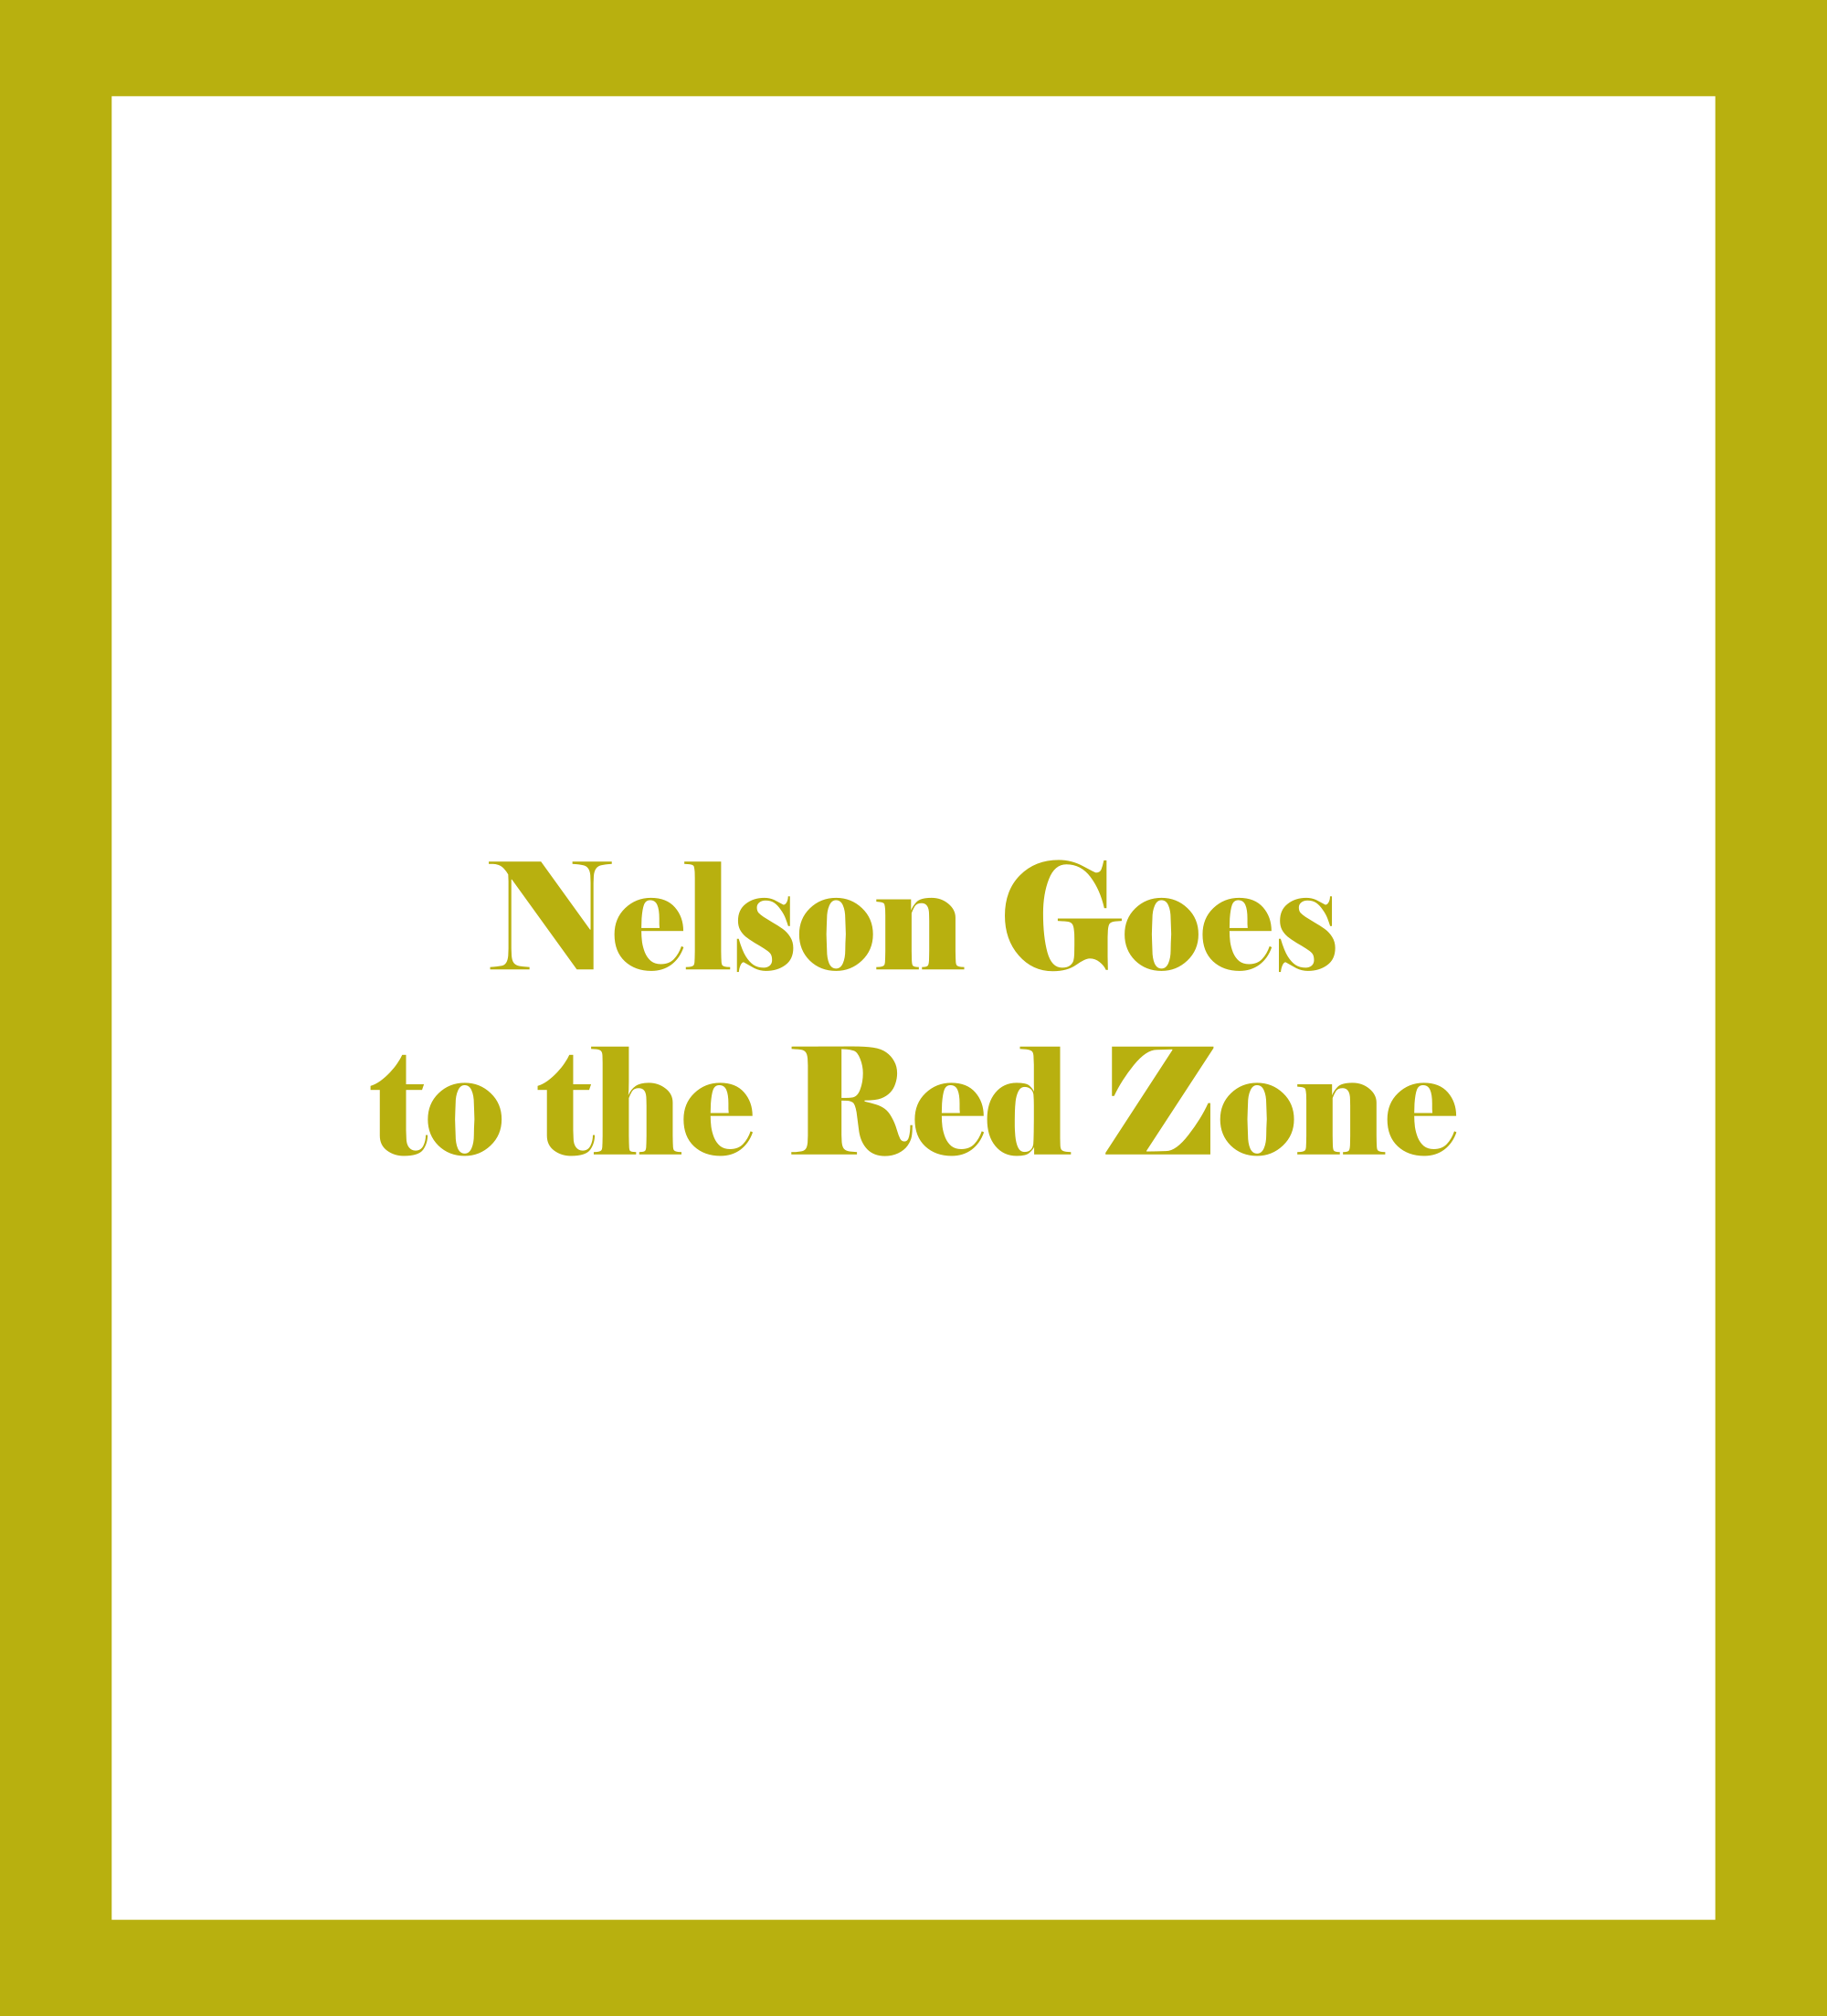 Nelson Goes to the Red Zone